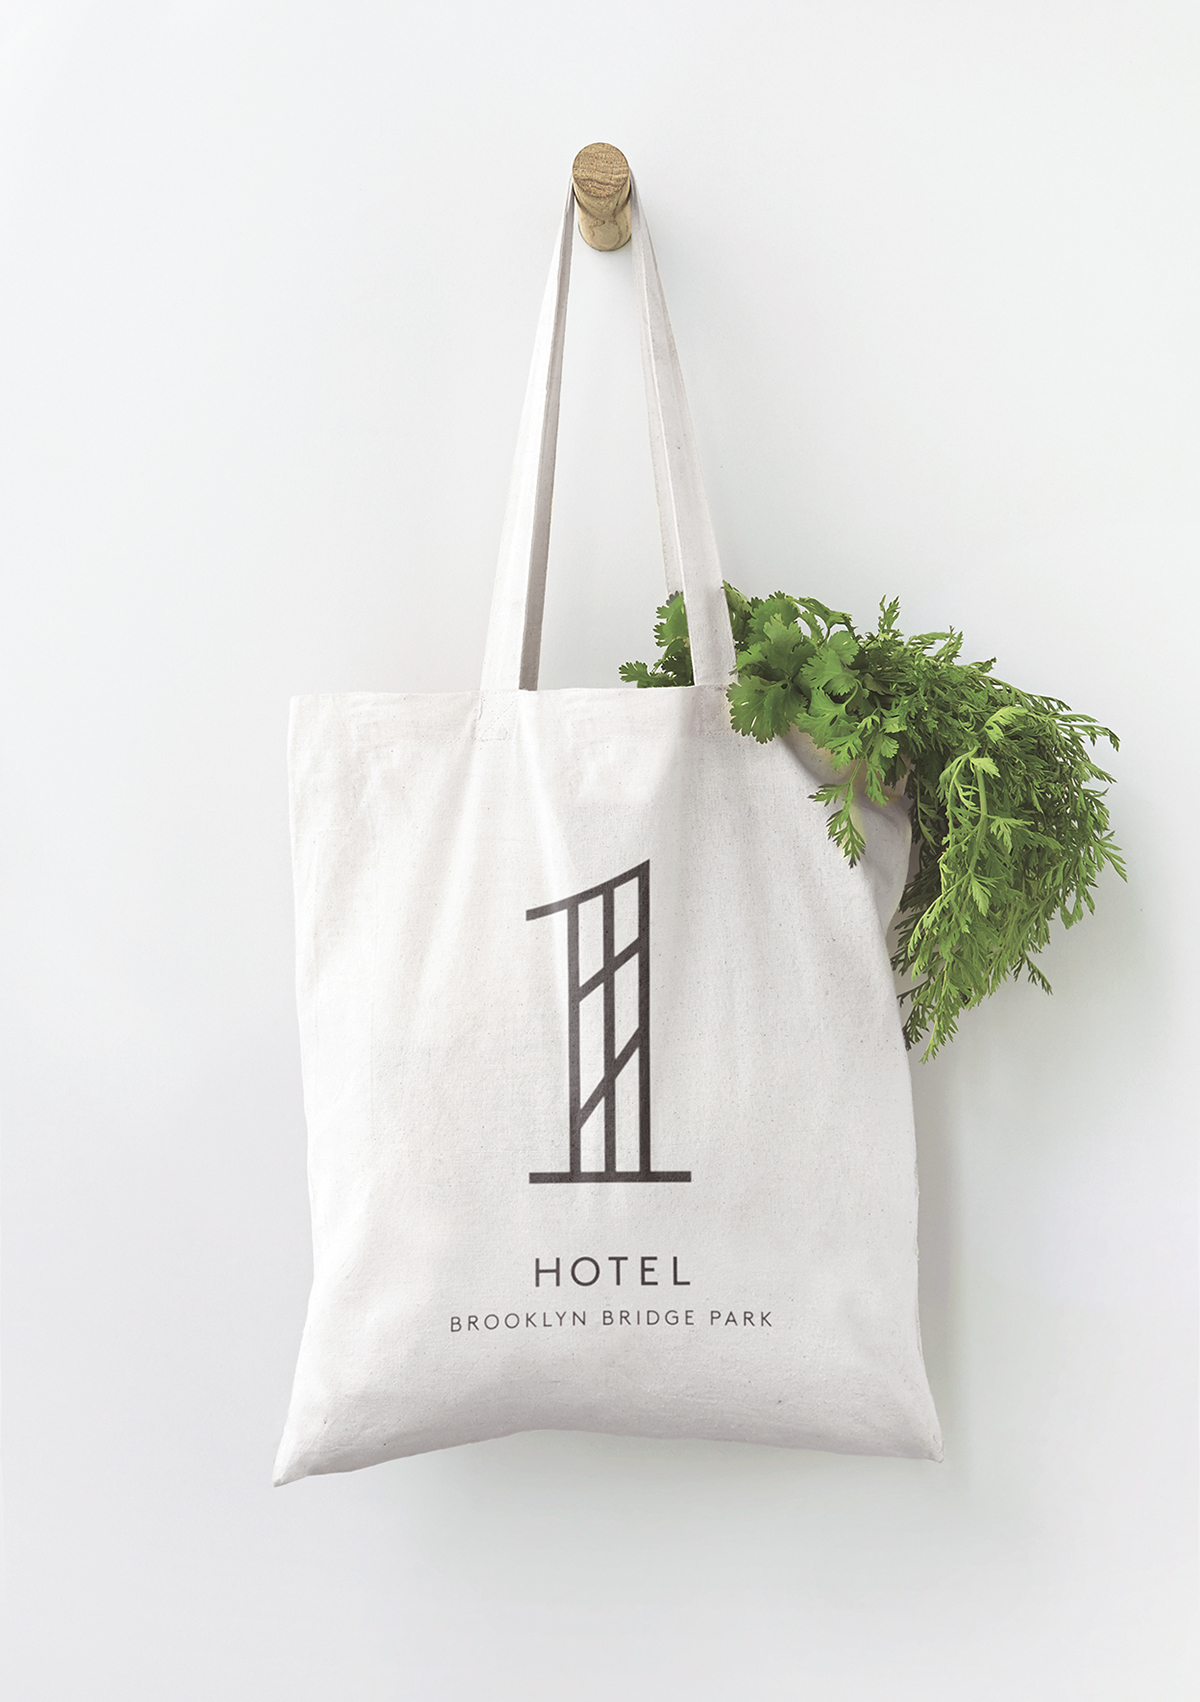 logo flexible identity hotels brandbook guidelines Business Cards Website still life natural Tote Bag green south beach Brooklyn Central Park